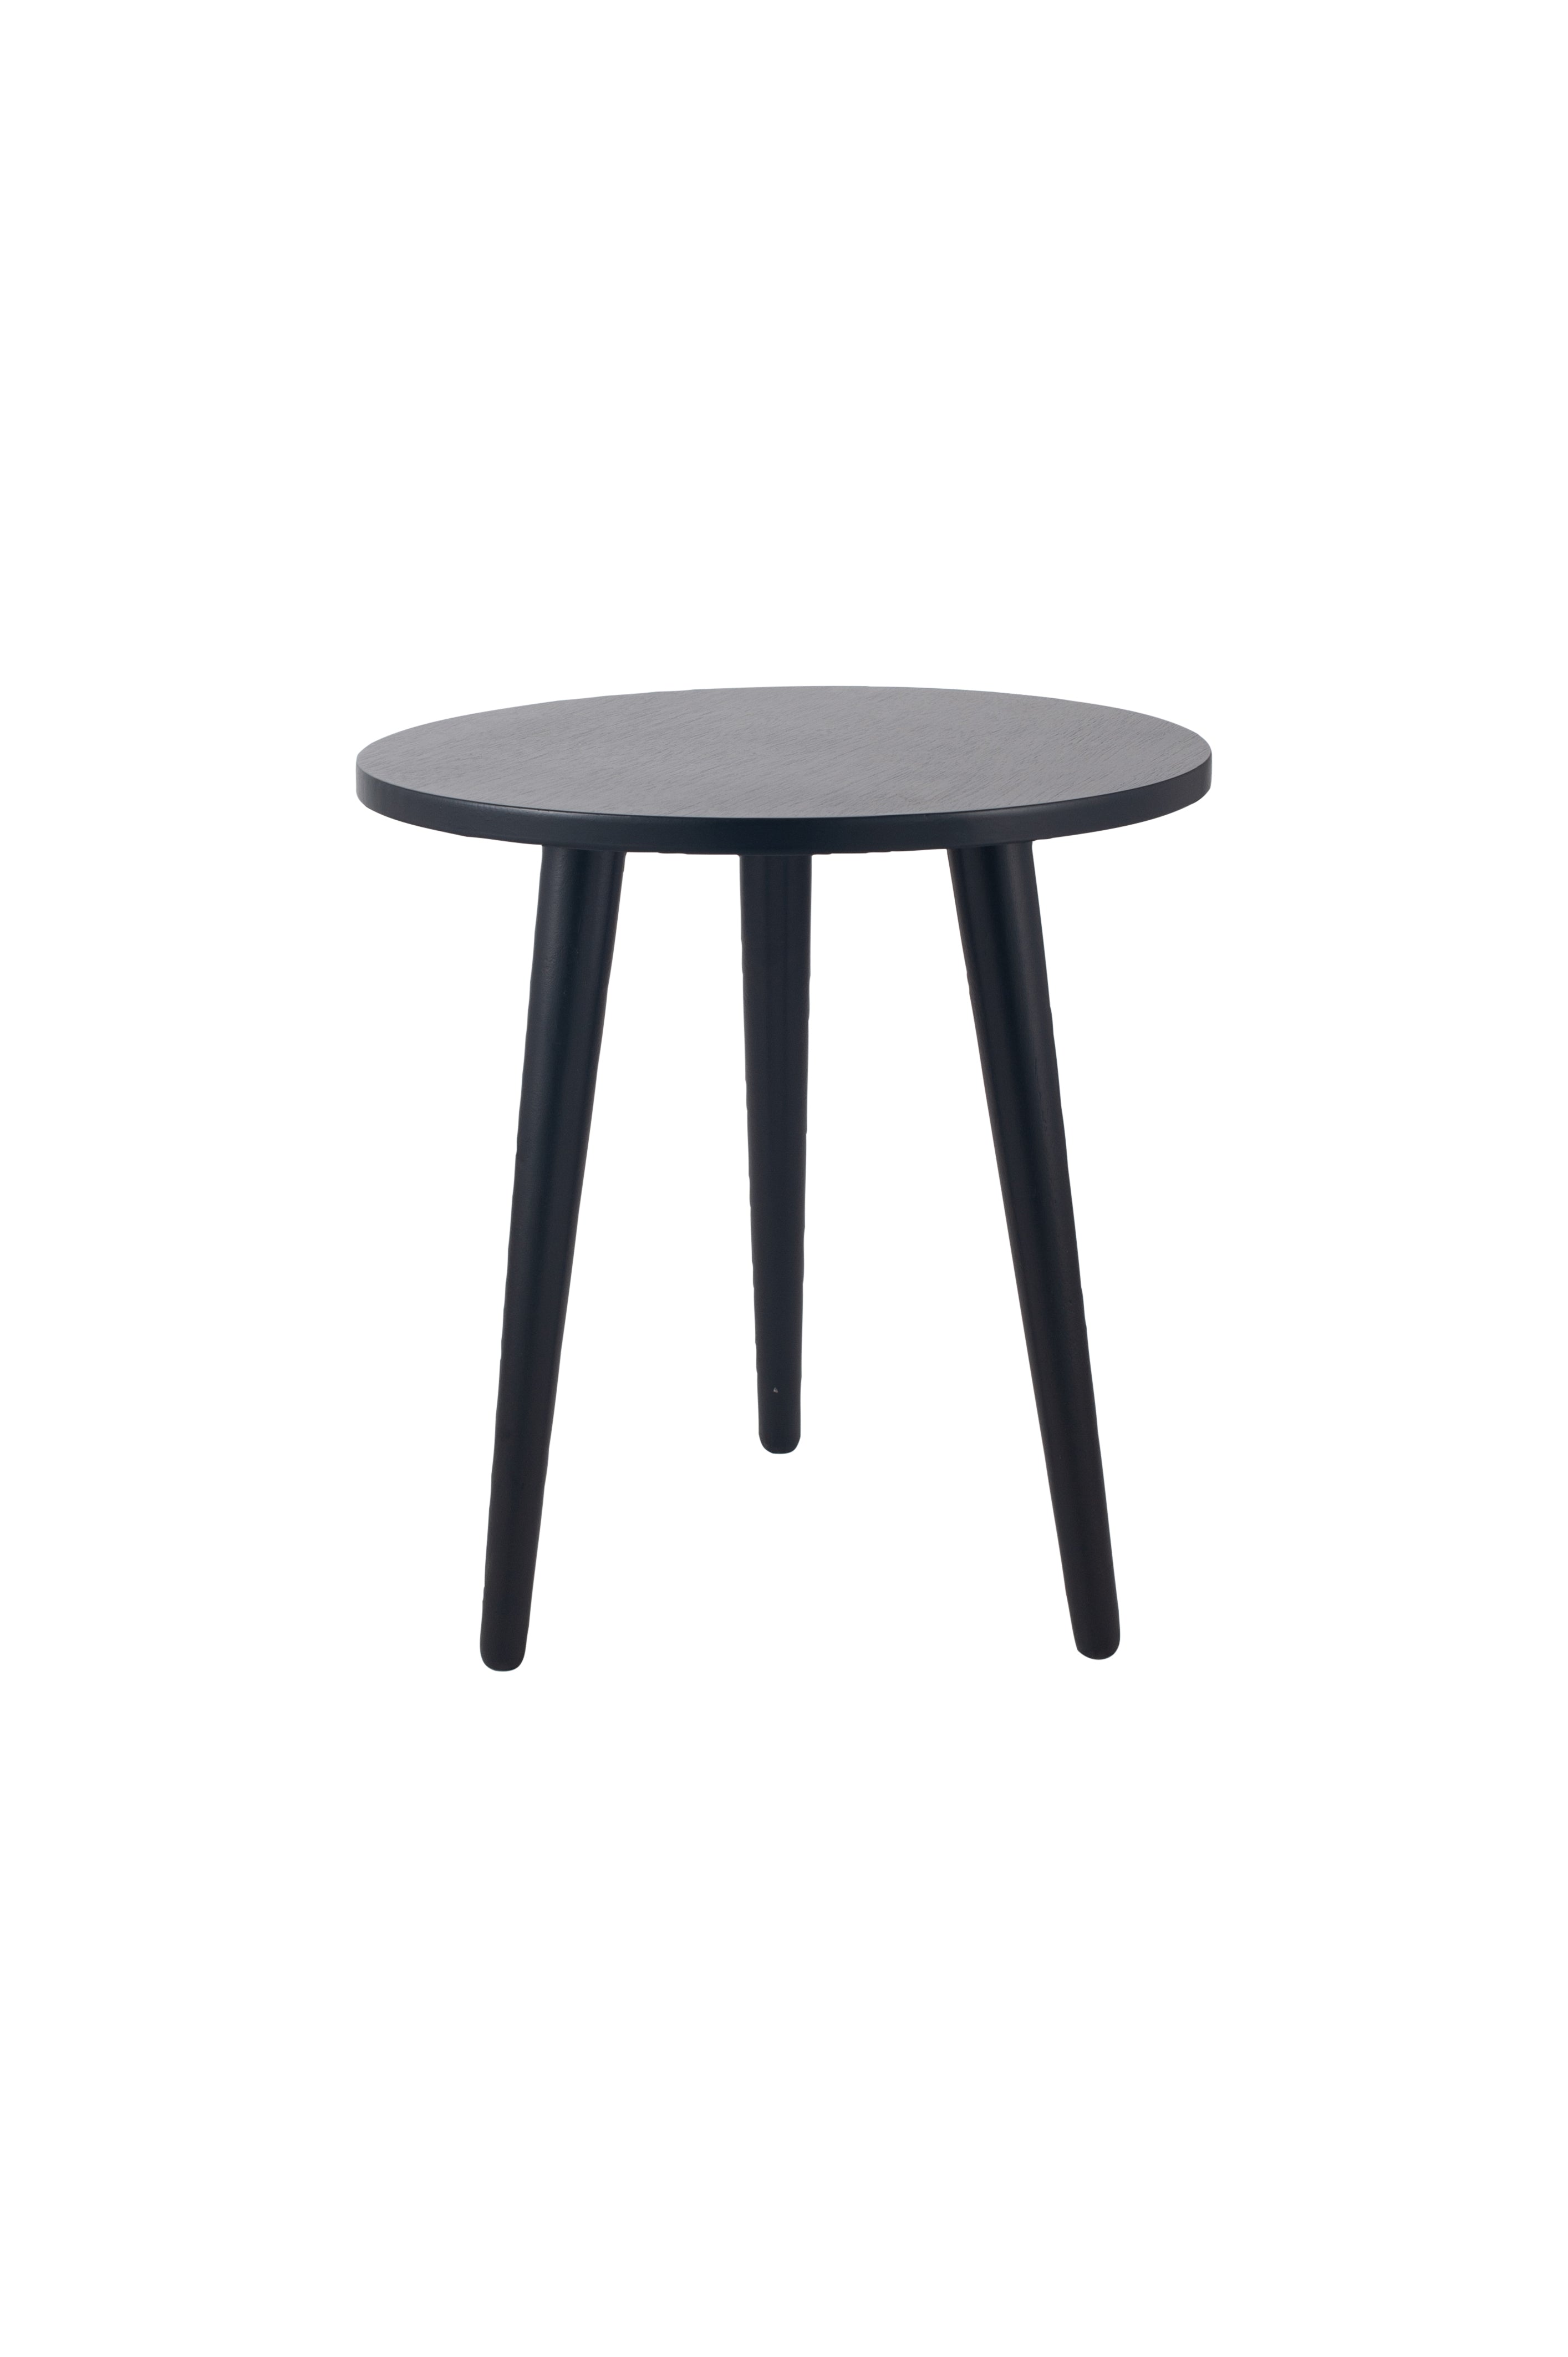 Chelmsford Satin Black Pine Wood Round Side Table K/D